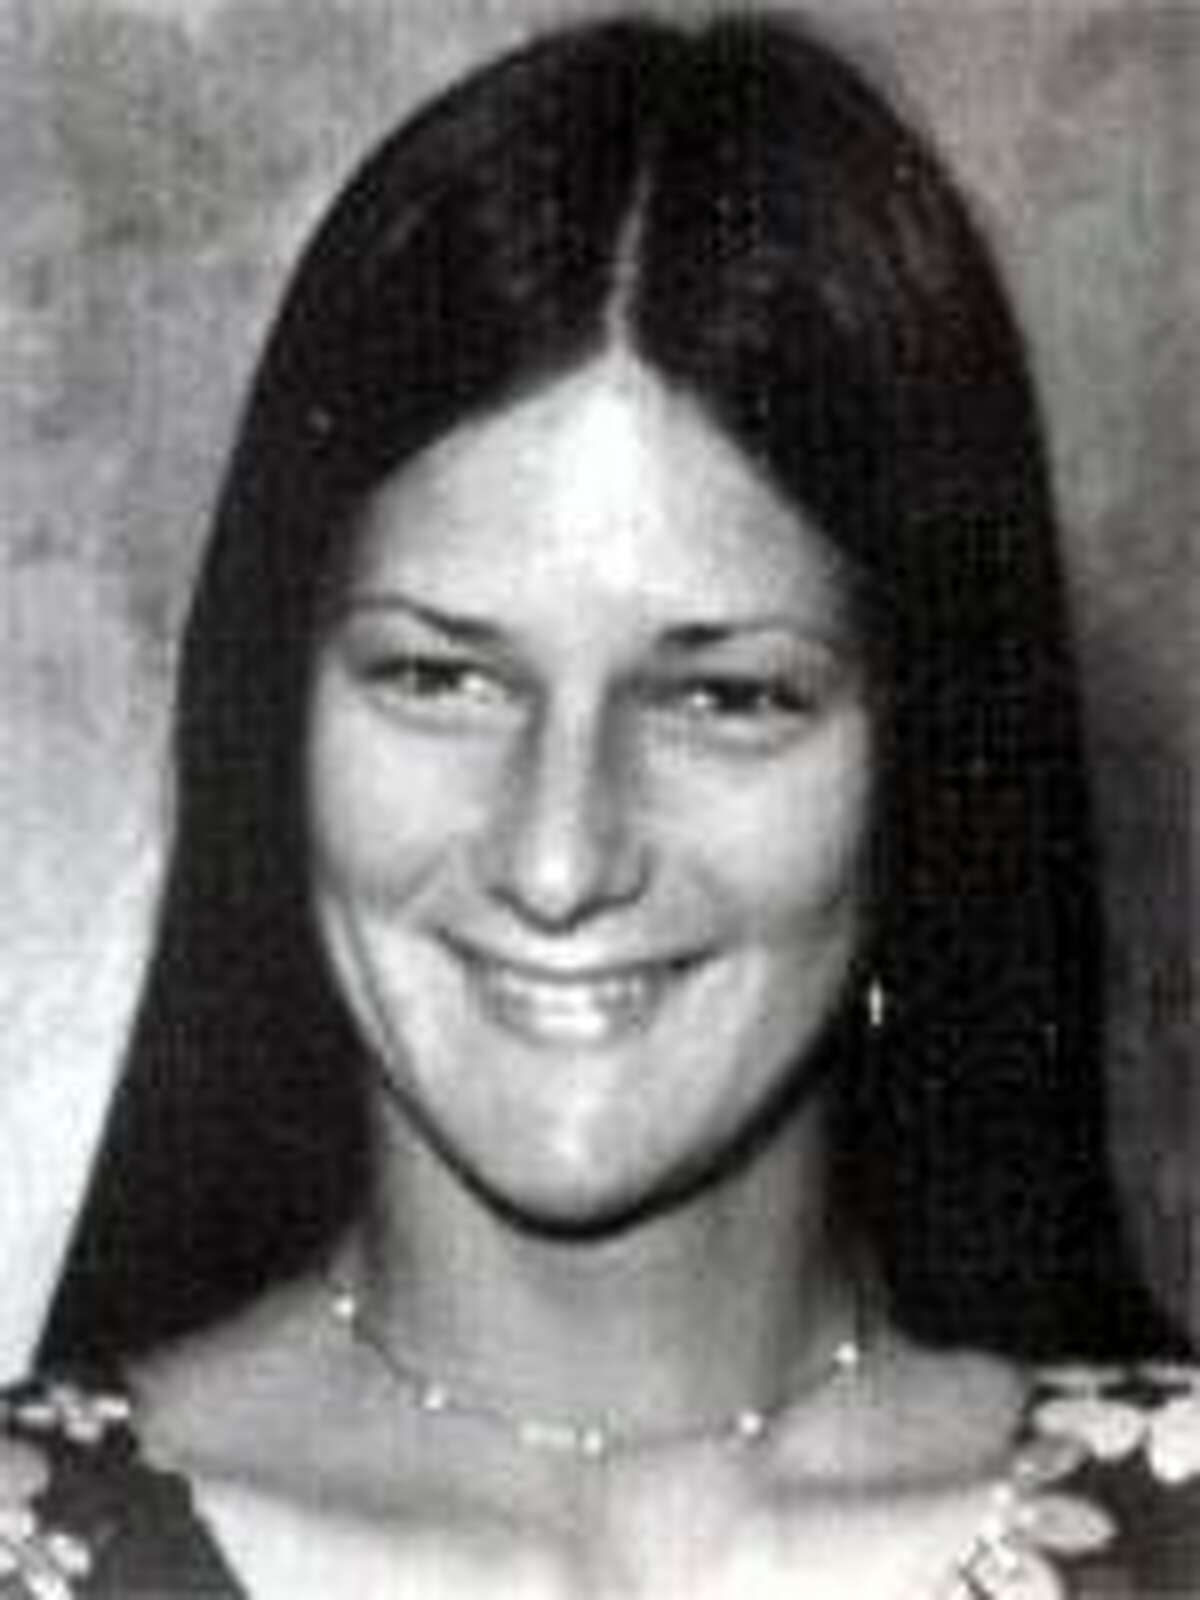 Denise Lampe, 19, of Broadmoor was found stabbed to death on April 1, 1976, in her car parked at the Serramonte Mall in Daly City.